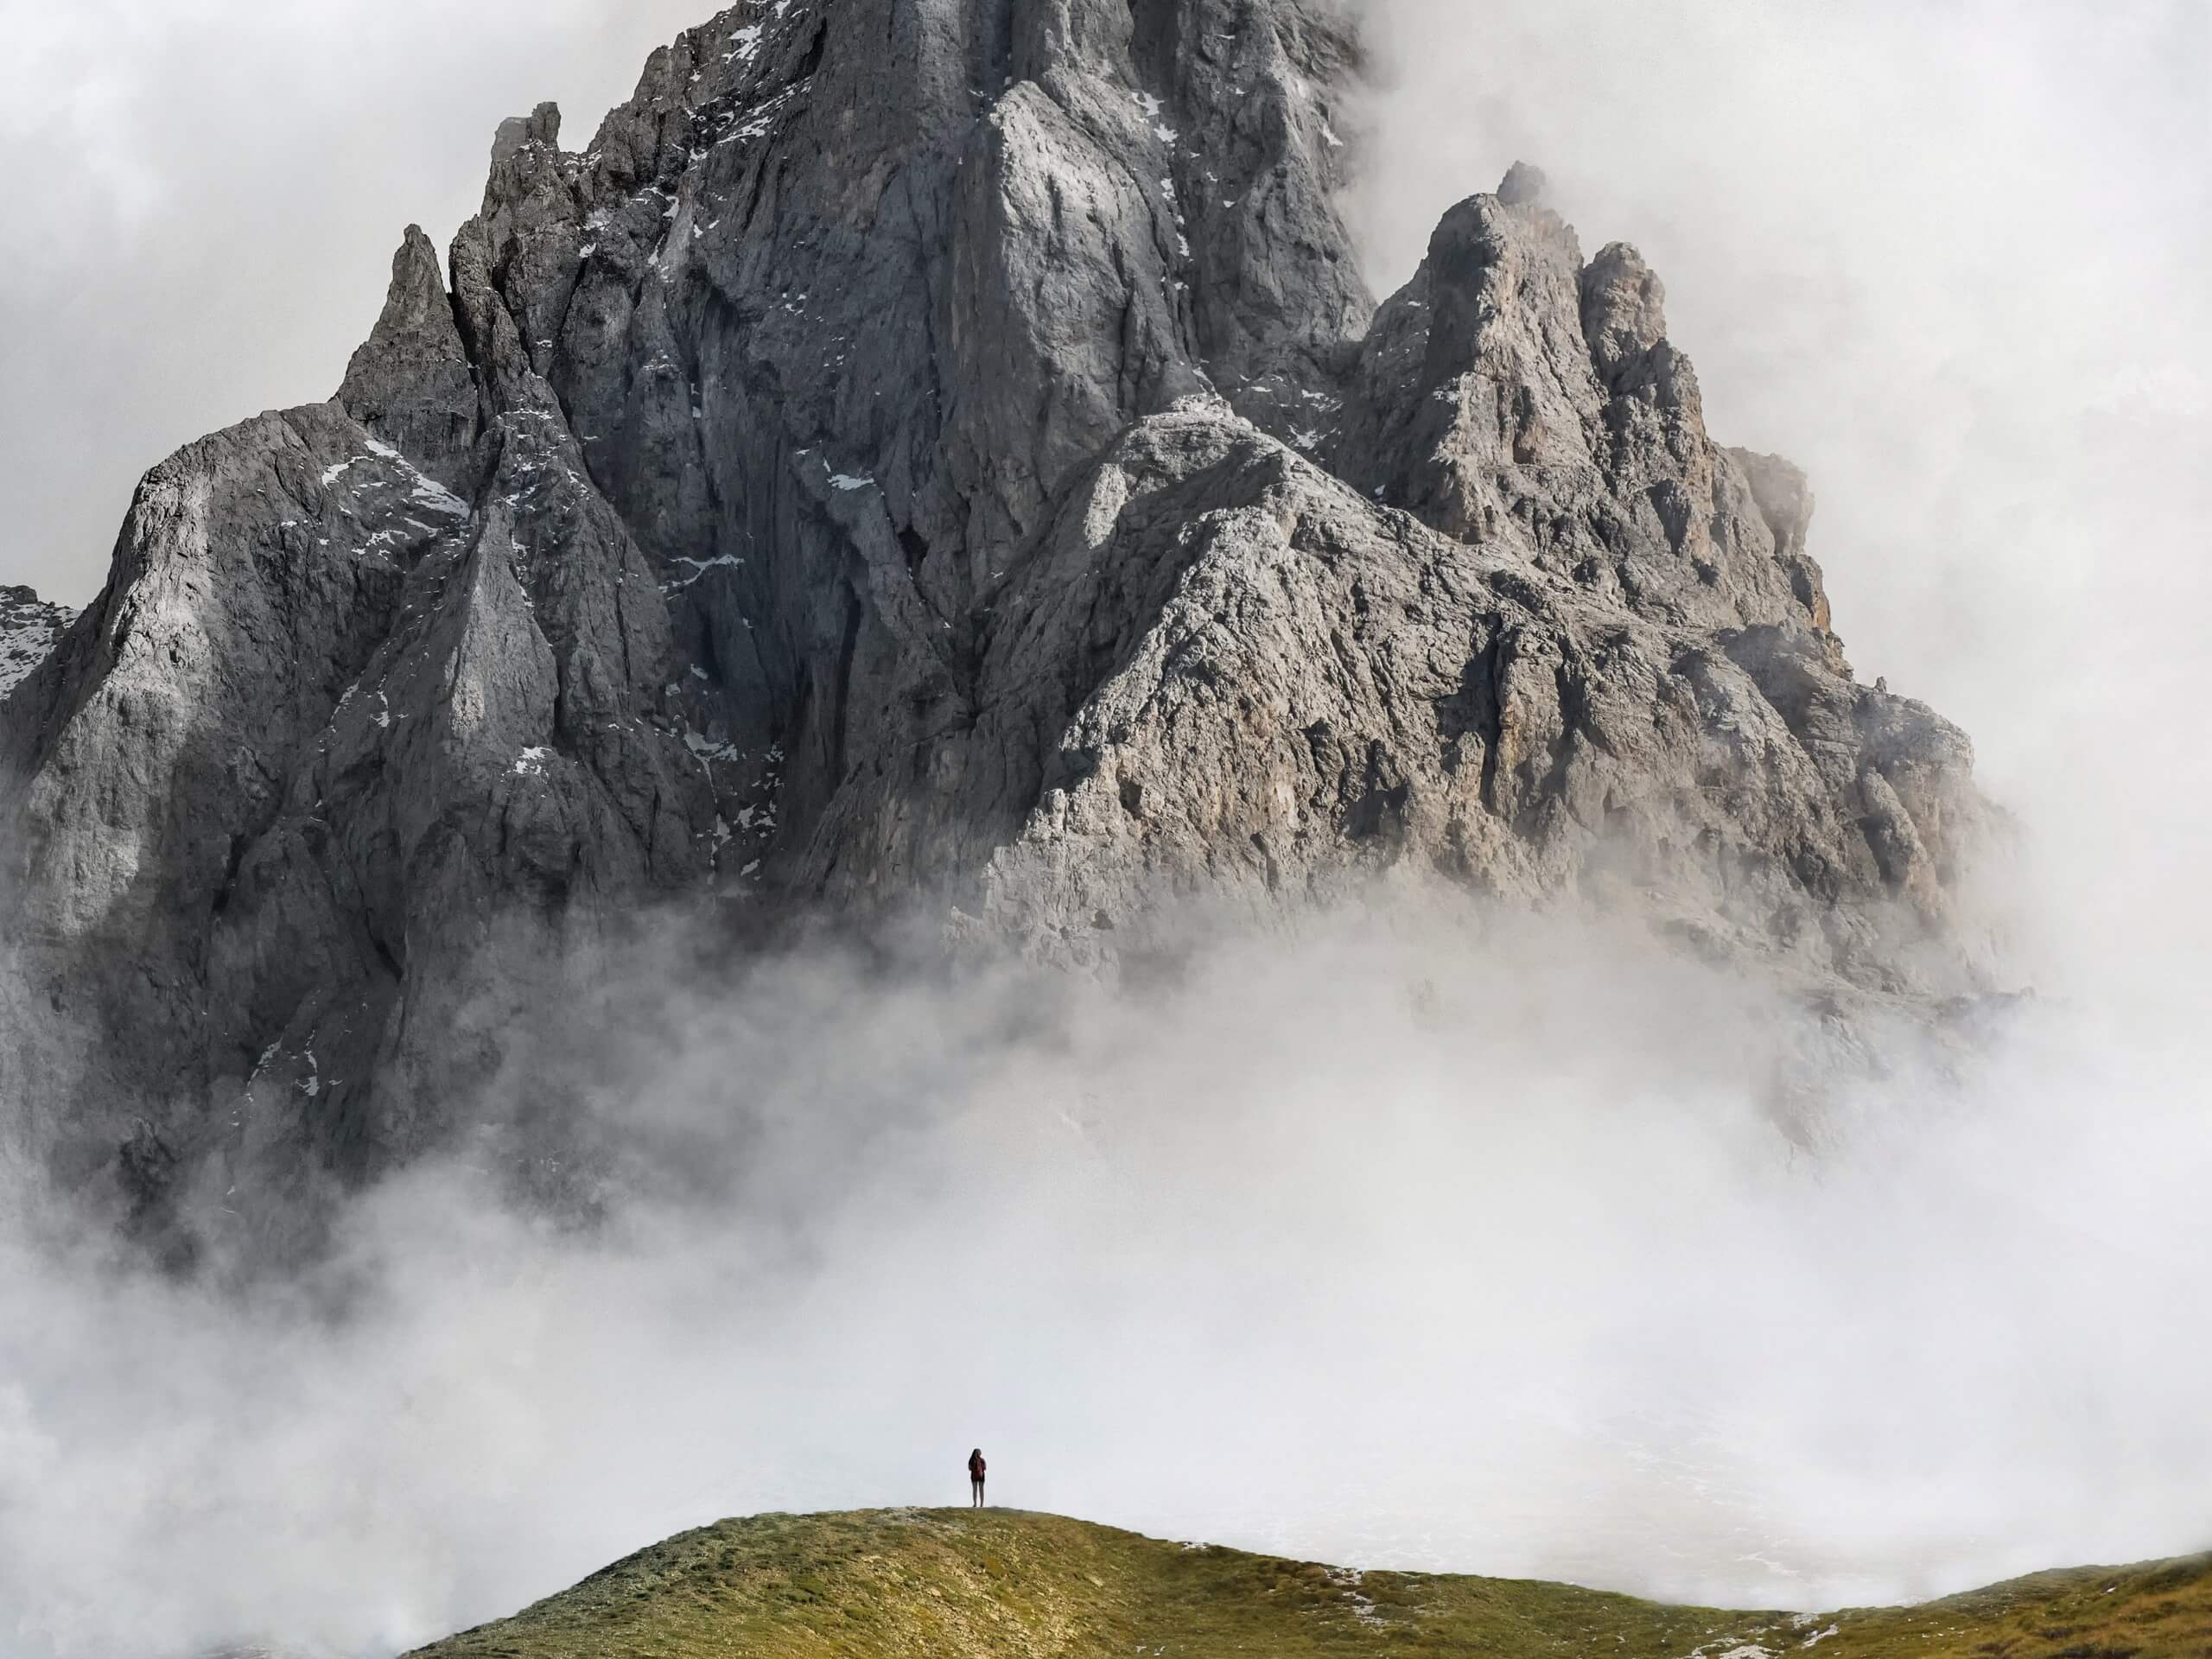 Clouds covering the mountain in Dolomites